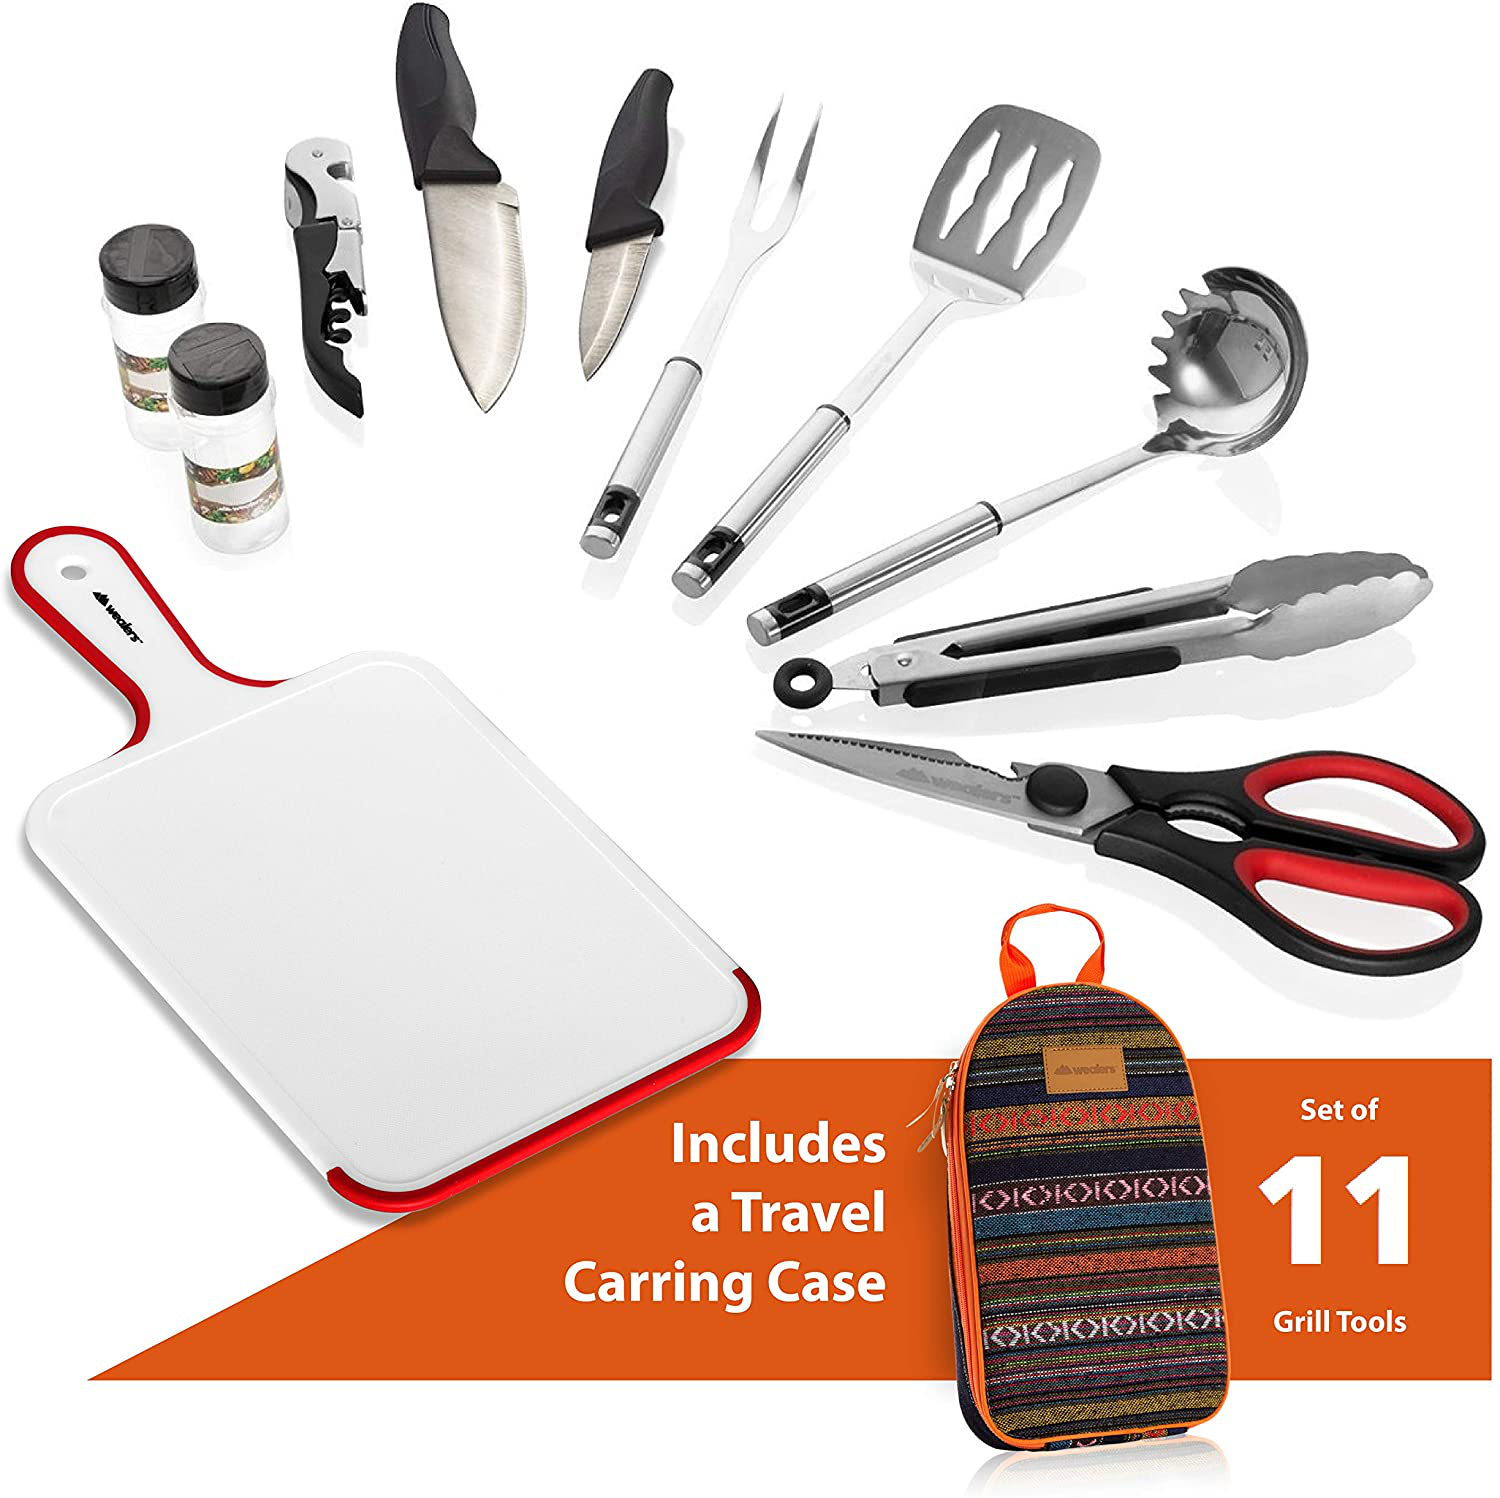 11 Piece Camp Kitchen Cooking Utensil Set Travel Organizer Grill Accessories Portable Compact Gear for Backpacking BBQ Camping Hiking Travel Cookware Kit Water Resistant Case